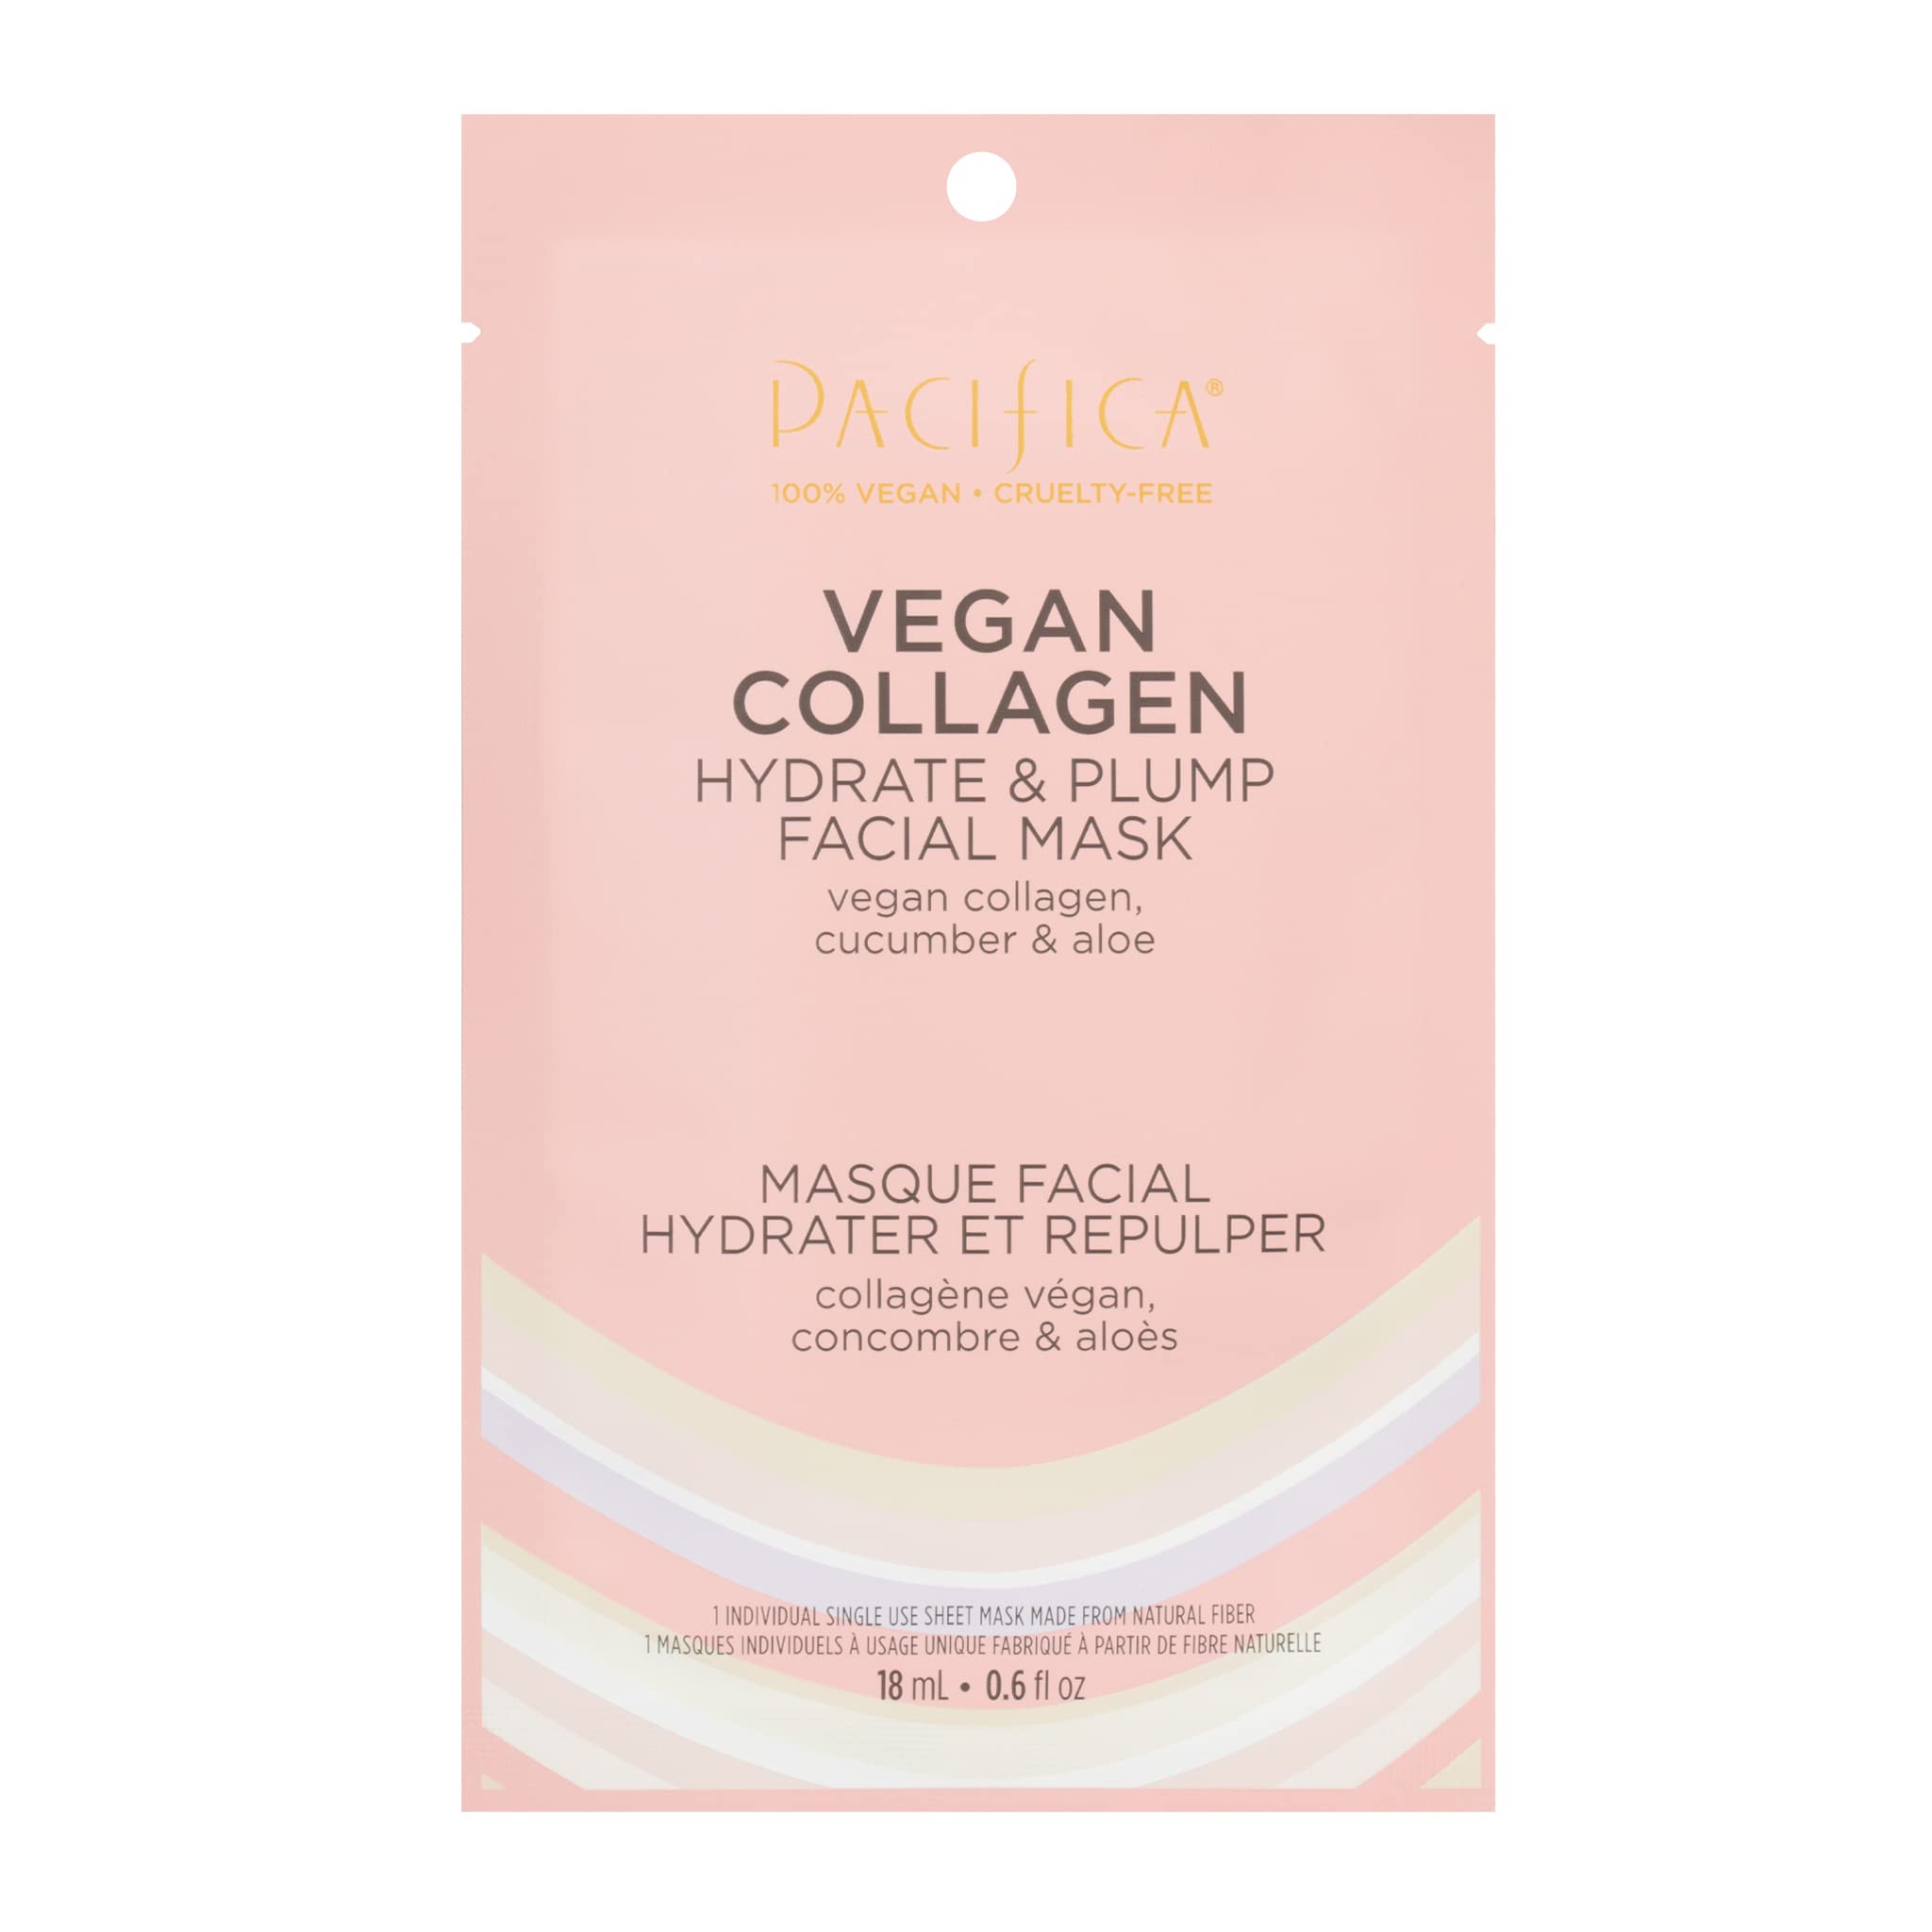 Pacifica Beauty, Vegan Collagen Hydrate & Plump Face Mask, Sheet Mask Set, Skincare, Moisturizer, Hydrated Dewy Skin, Cucumber & Aloe, For Dry & Aging Skin, 1 Pack, Vegan